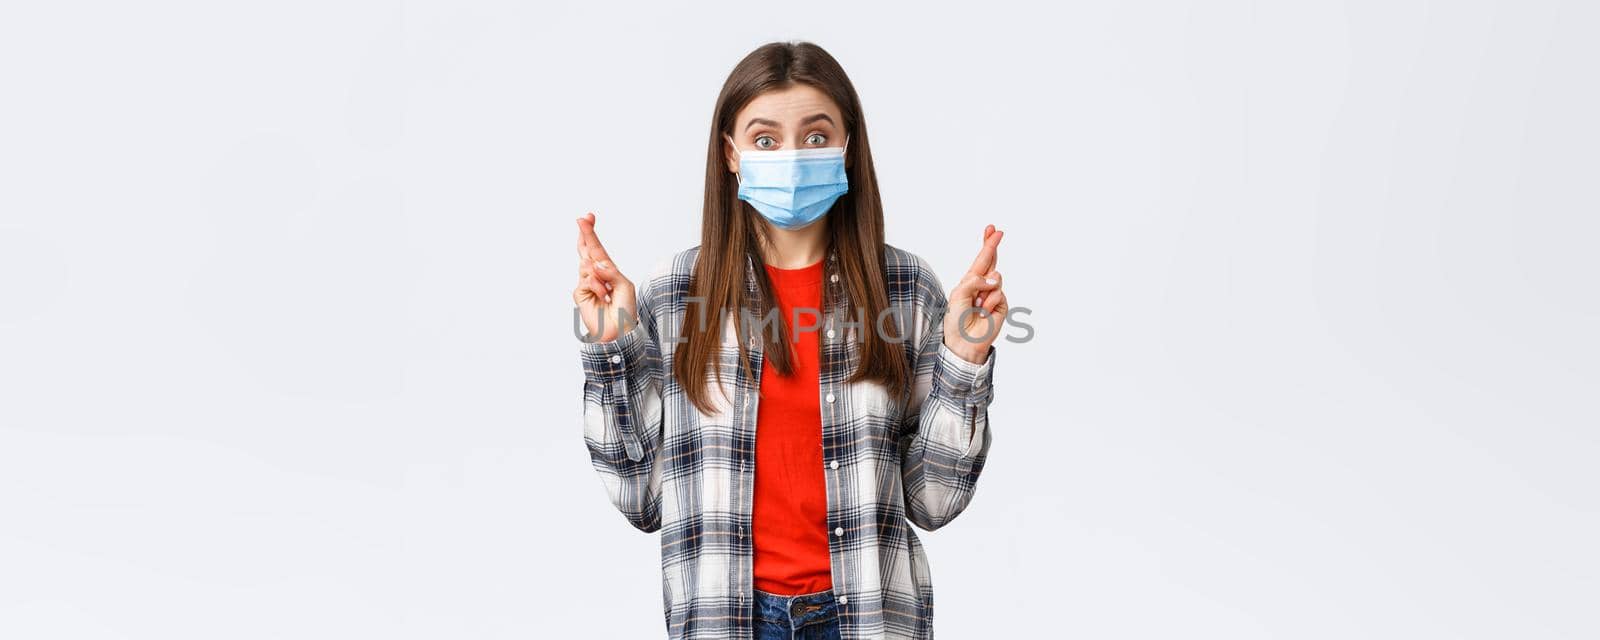 Coronavirus outbreak, leisure on quarantine, social distancing and emotions concept. Hopeful optimistic cute girl in medical mask have faith, cross fingers good luck, making wish or praying.